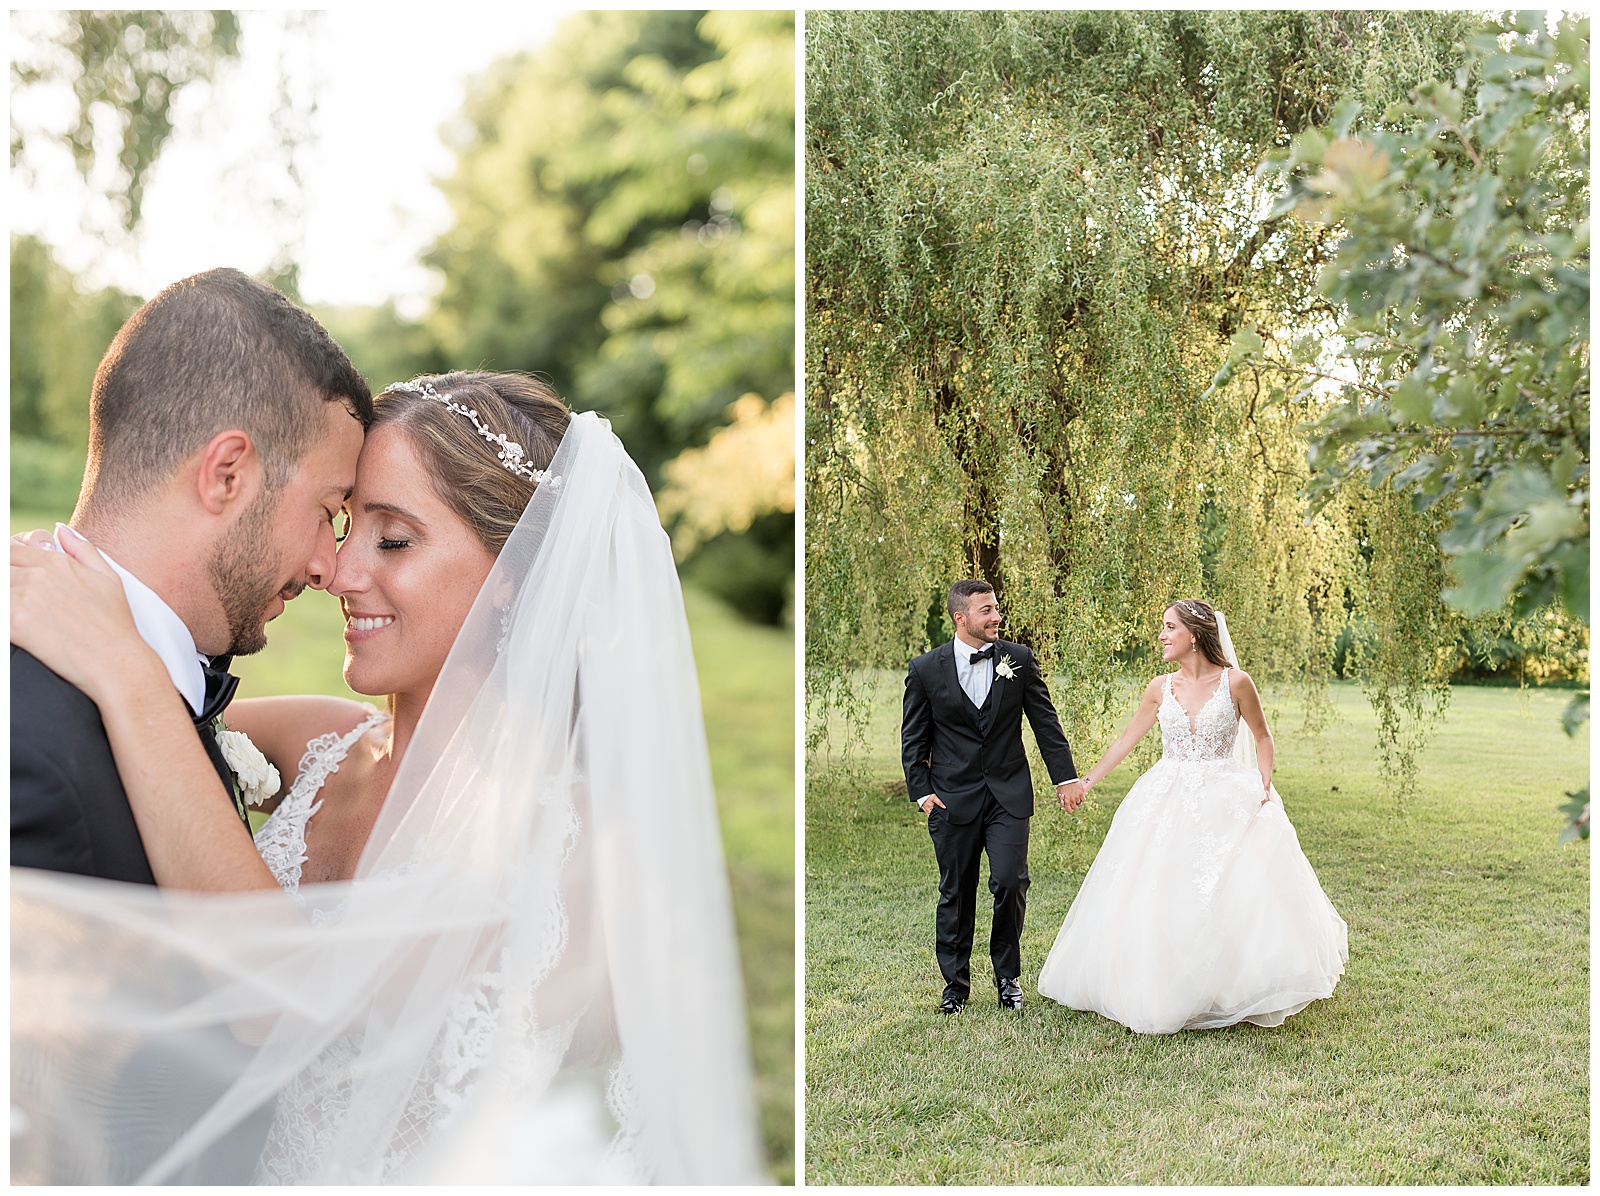 bride and groom happily embracing by willow tree on sunny wedding day